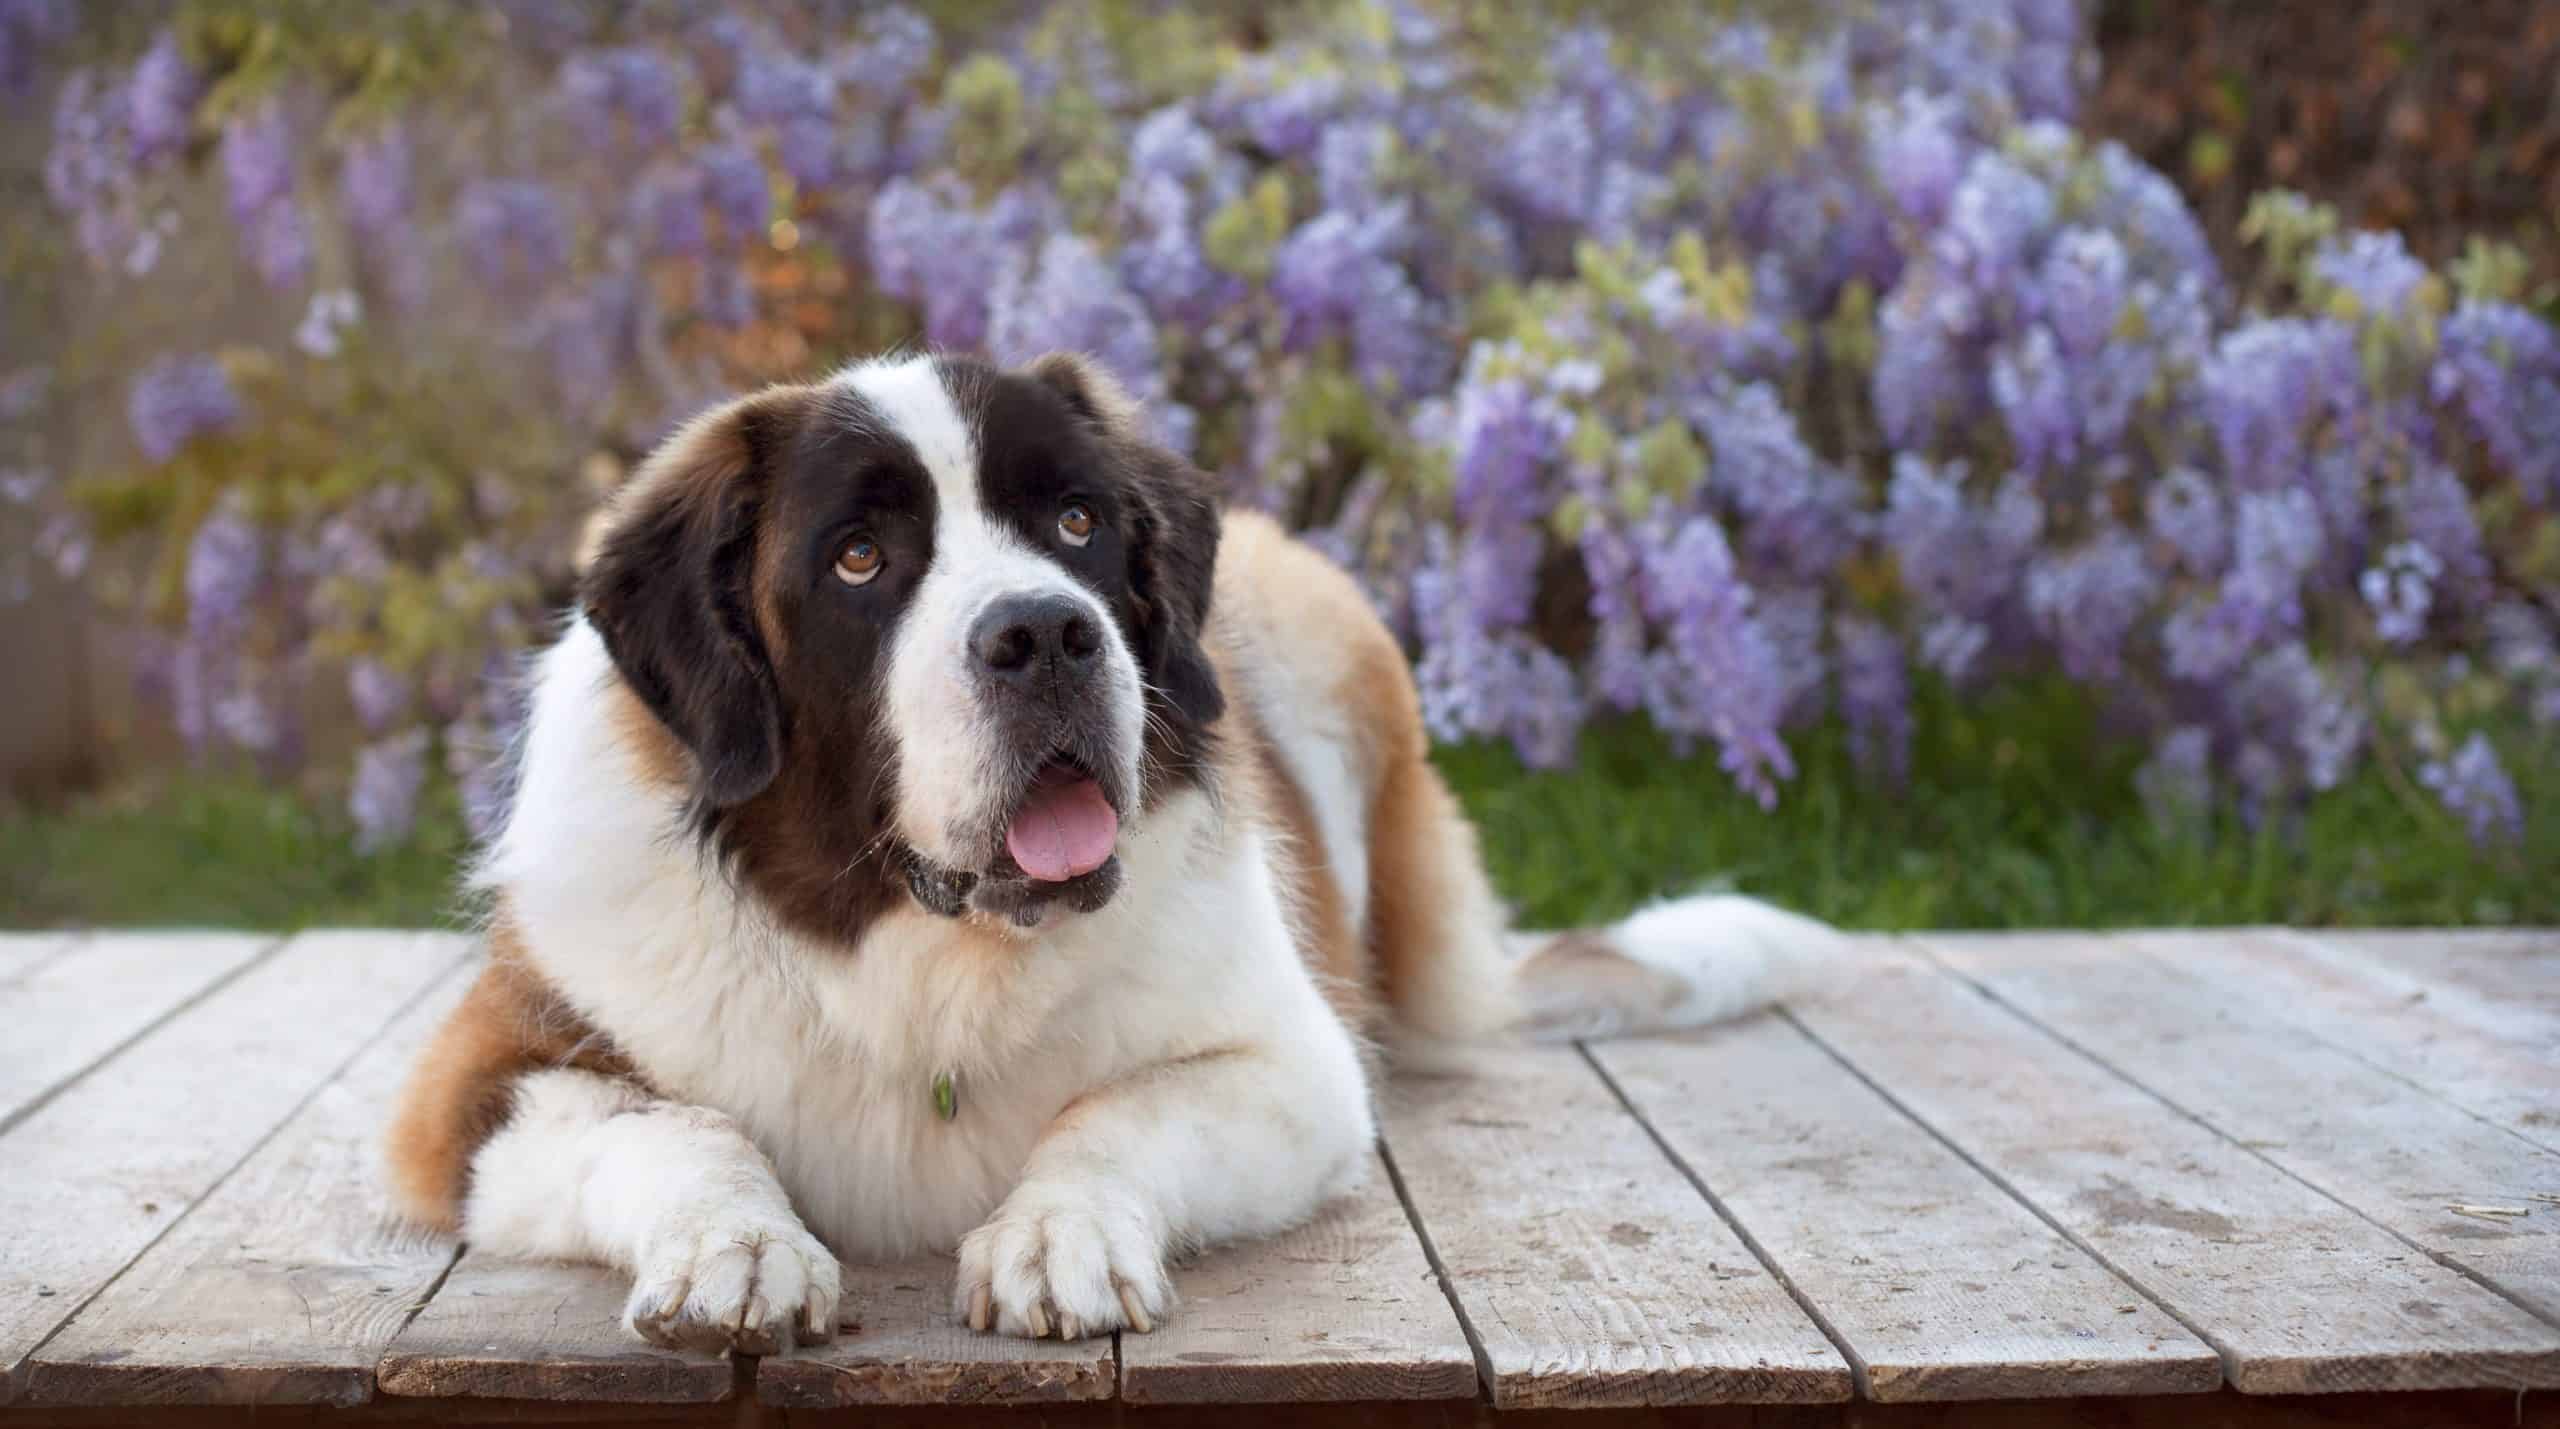 St. Bernard rests on a deck. The way dogs mark their territories could attract larger wild animals. For example, coyotes and foxes may choose to compete for an area.